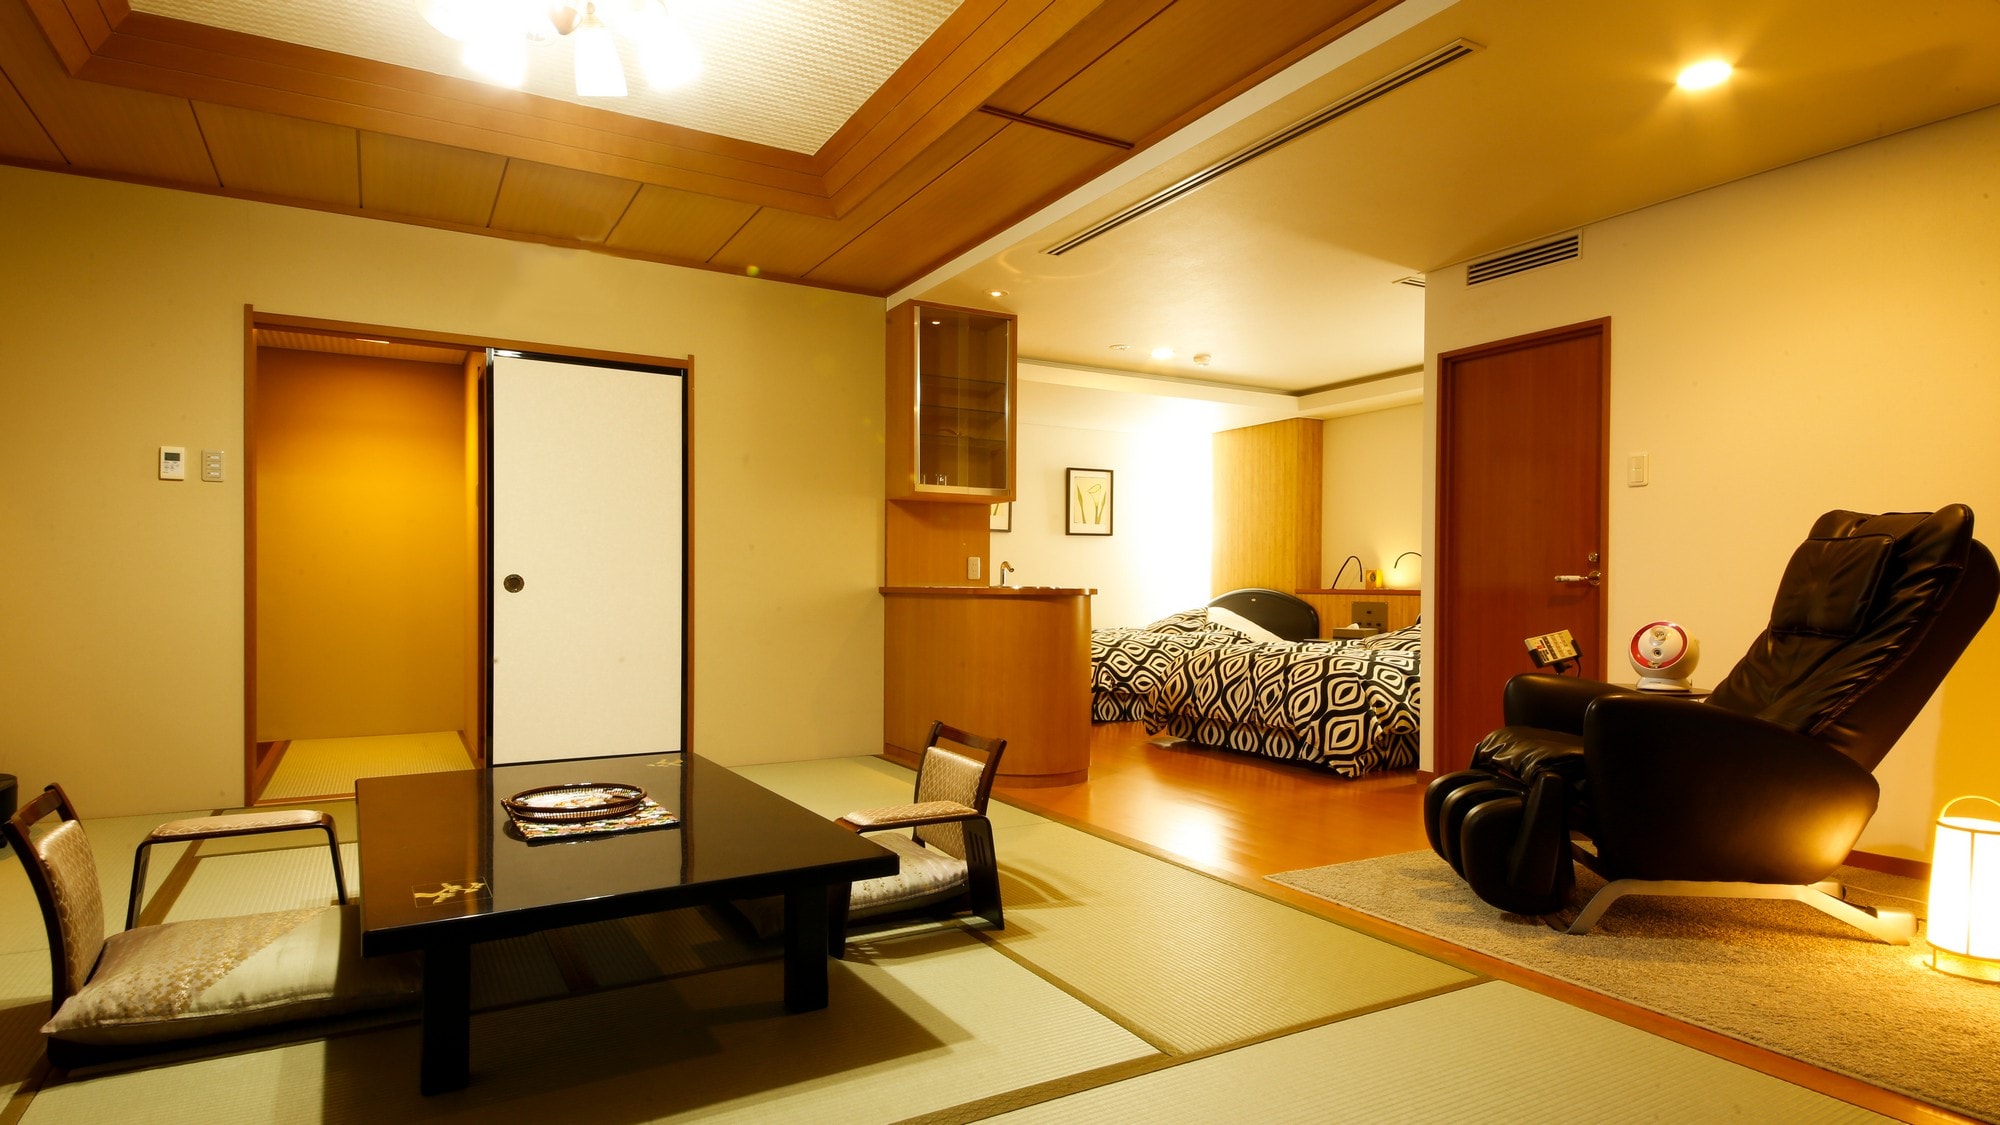 Suite with open-air bath Japanese-Western style room-Panorama view overlooking the hot spring town. Two large beds in the bedroom. Massage chair